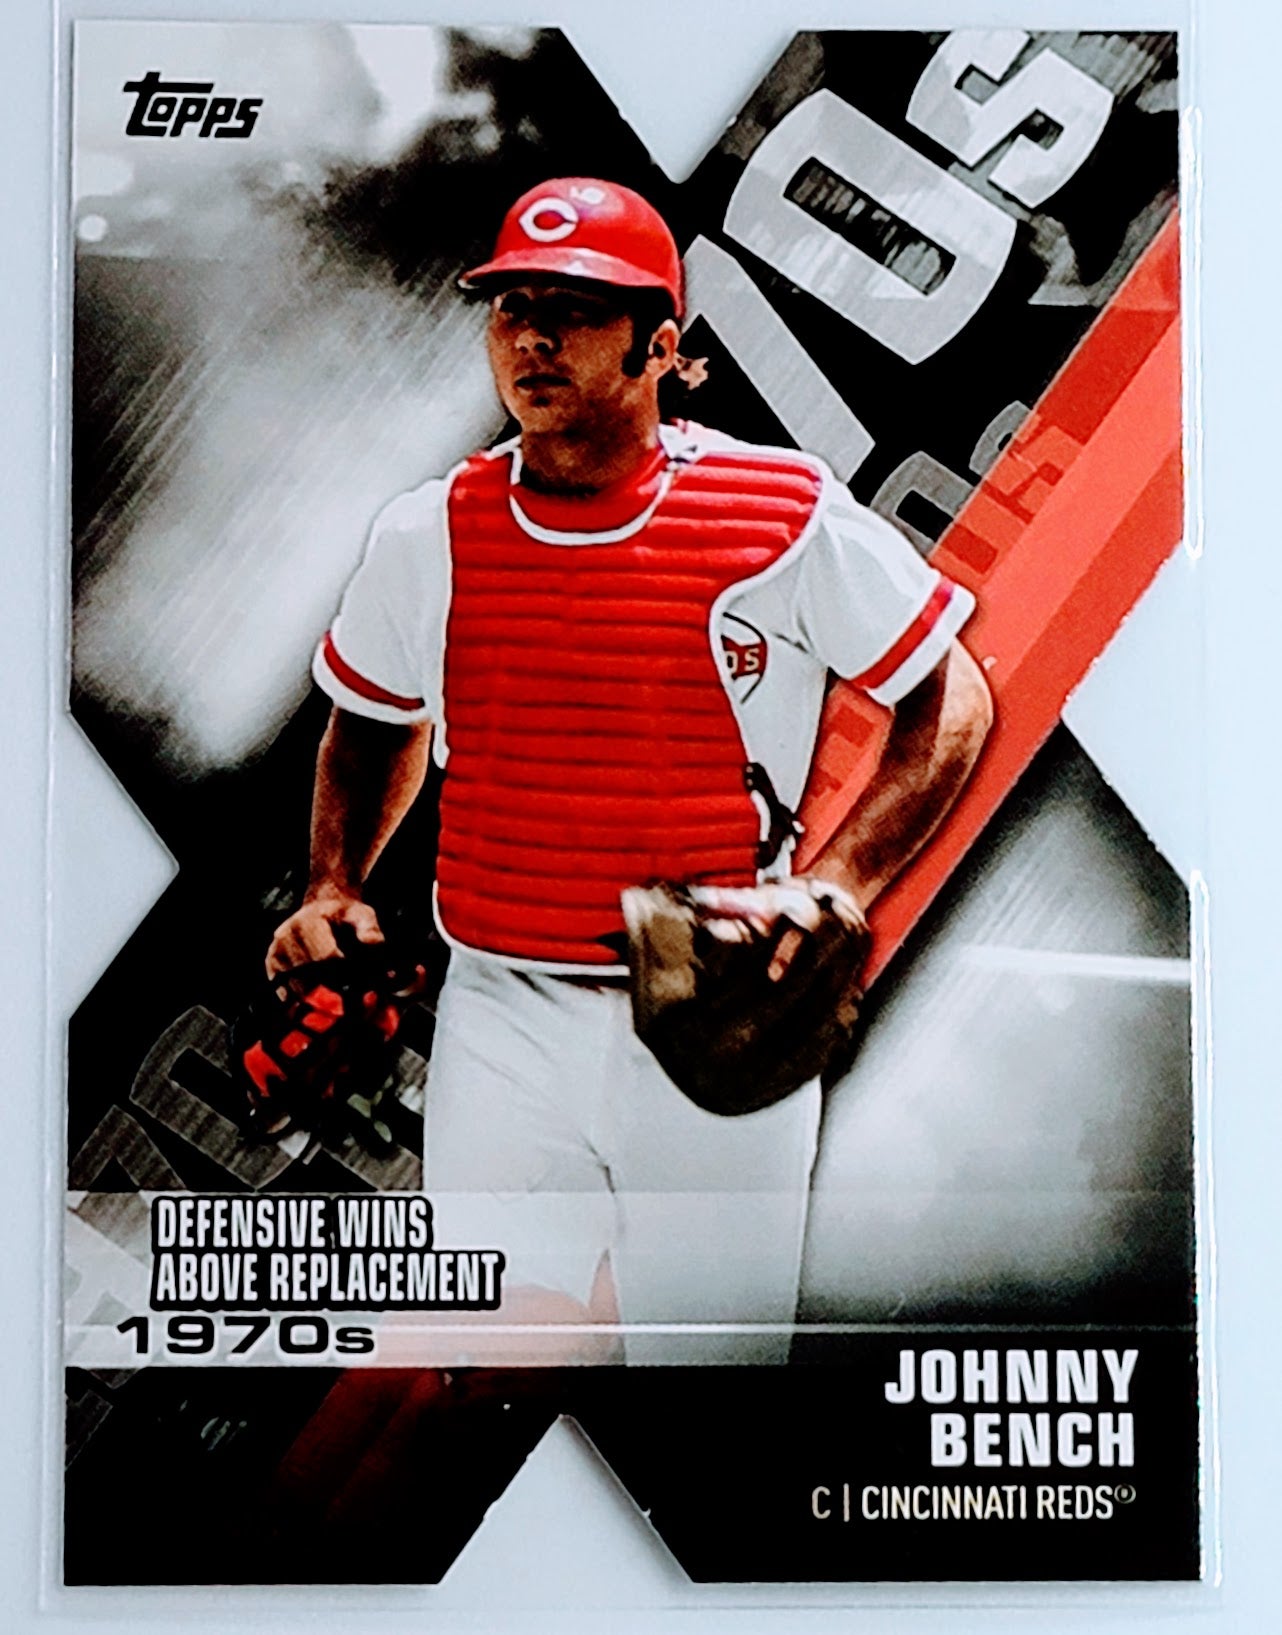 2020 Topps Johnny Bench Decade of Dominance Baseball Card TH13C